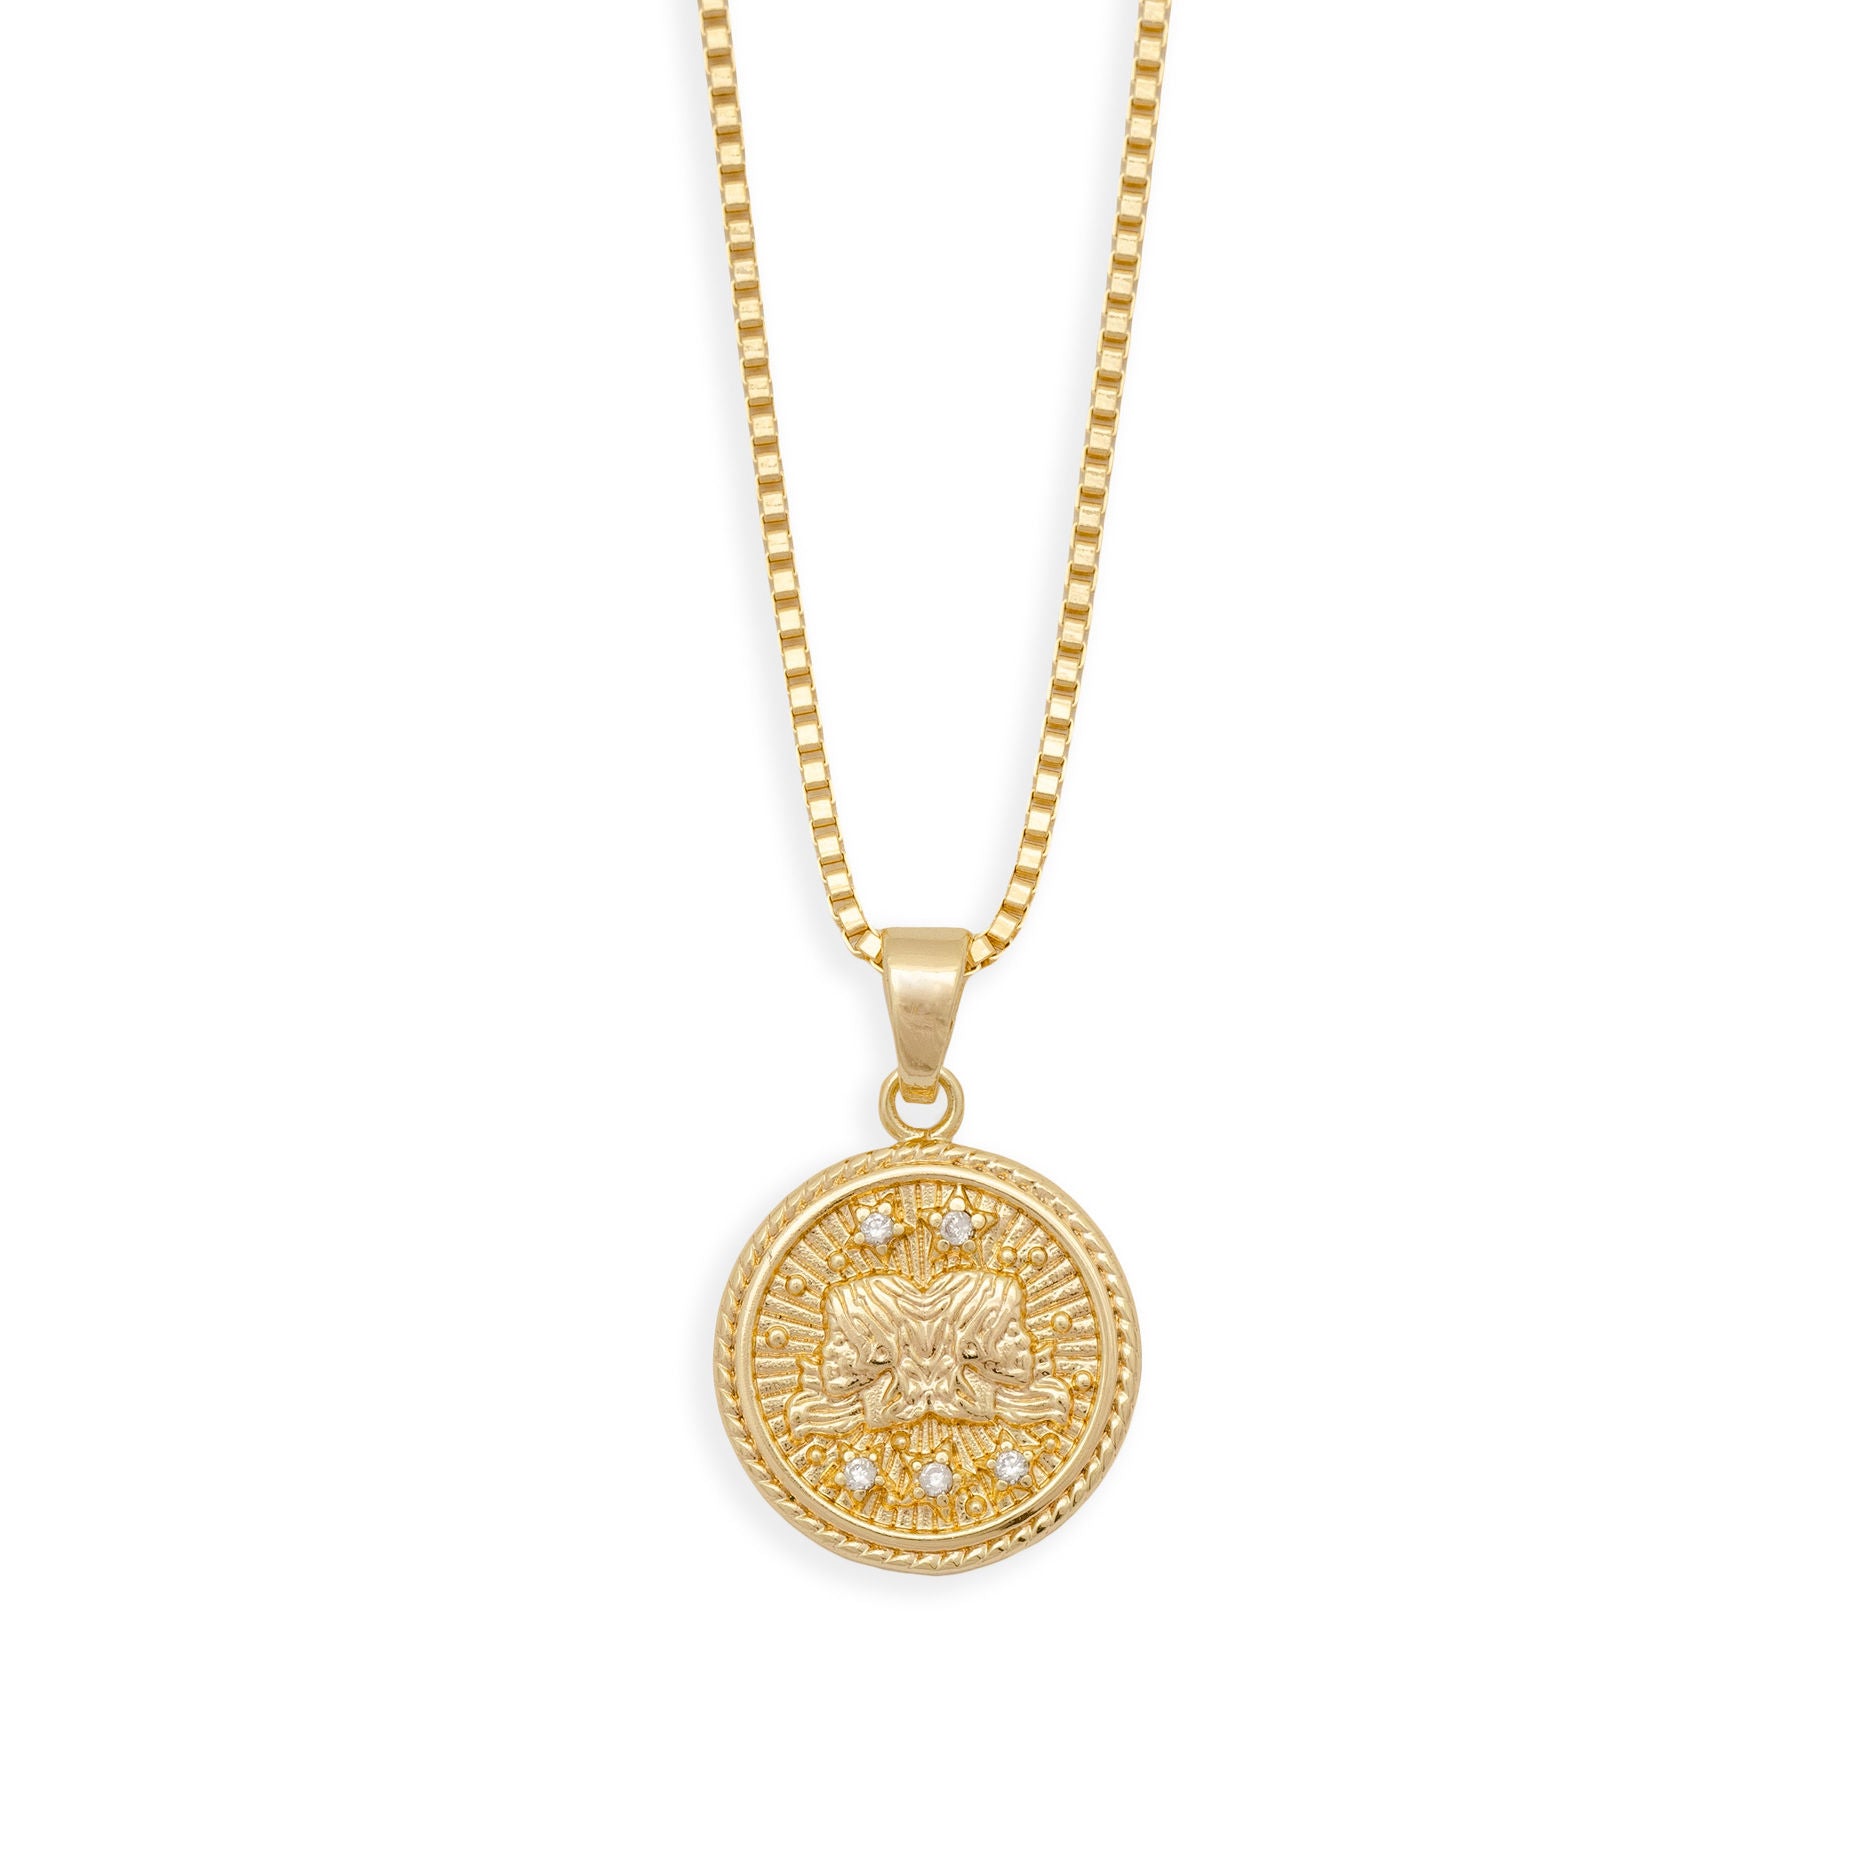 In the Stars Zodiac Necklace - Gemini from Erin Fader Jewelry